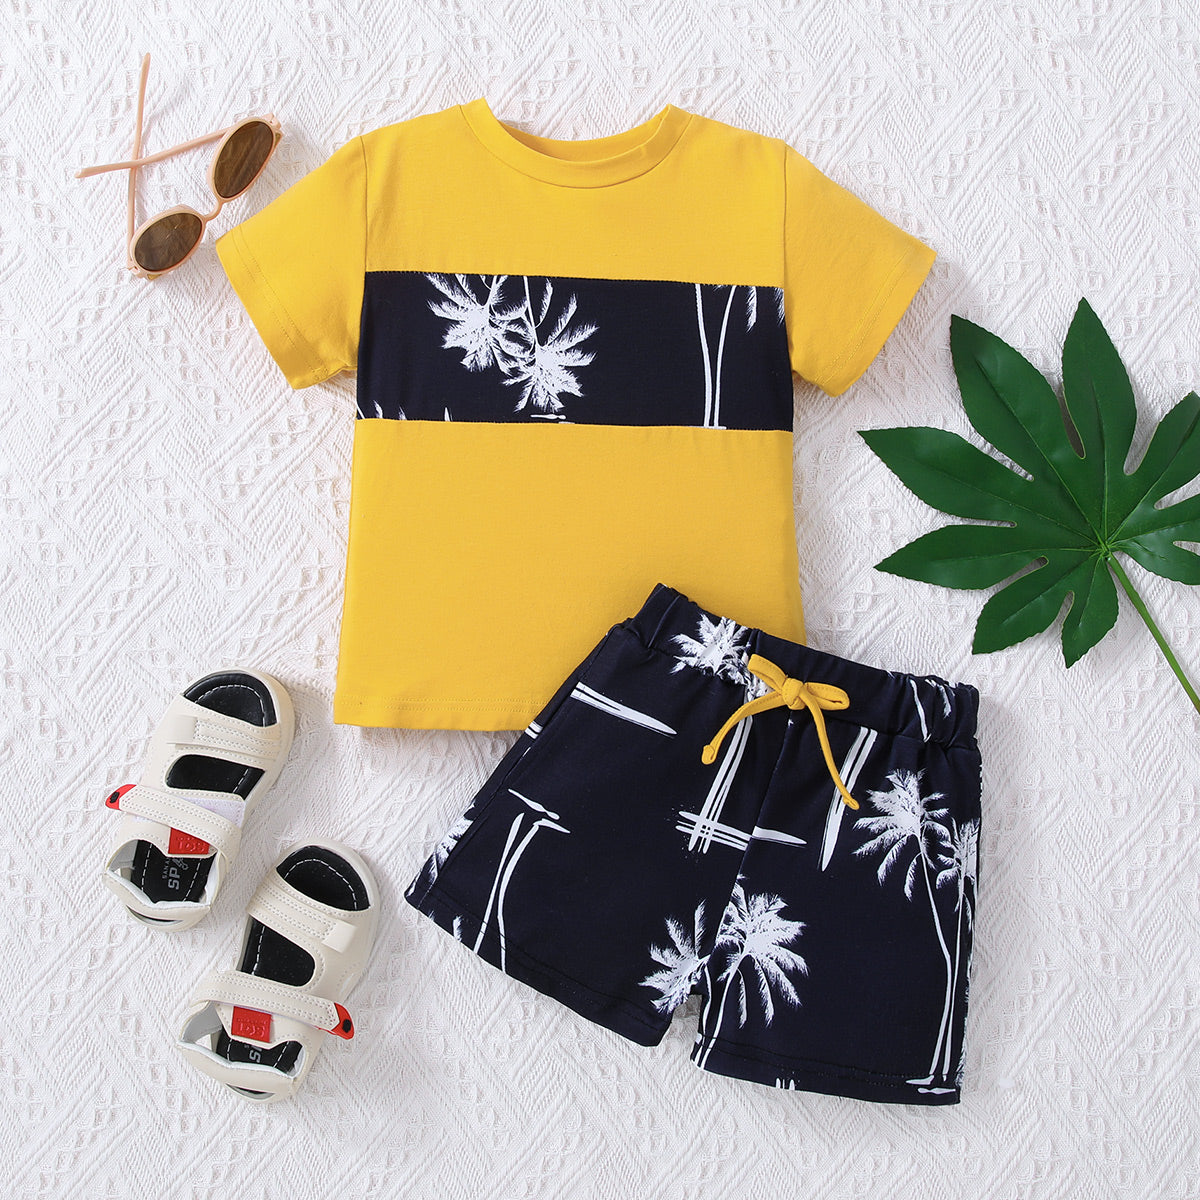 Kids Graphic Tee and Printed Shorts Set - Heart 2 Heart Boutique